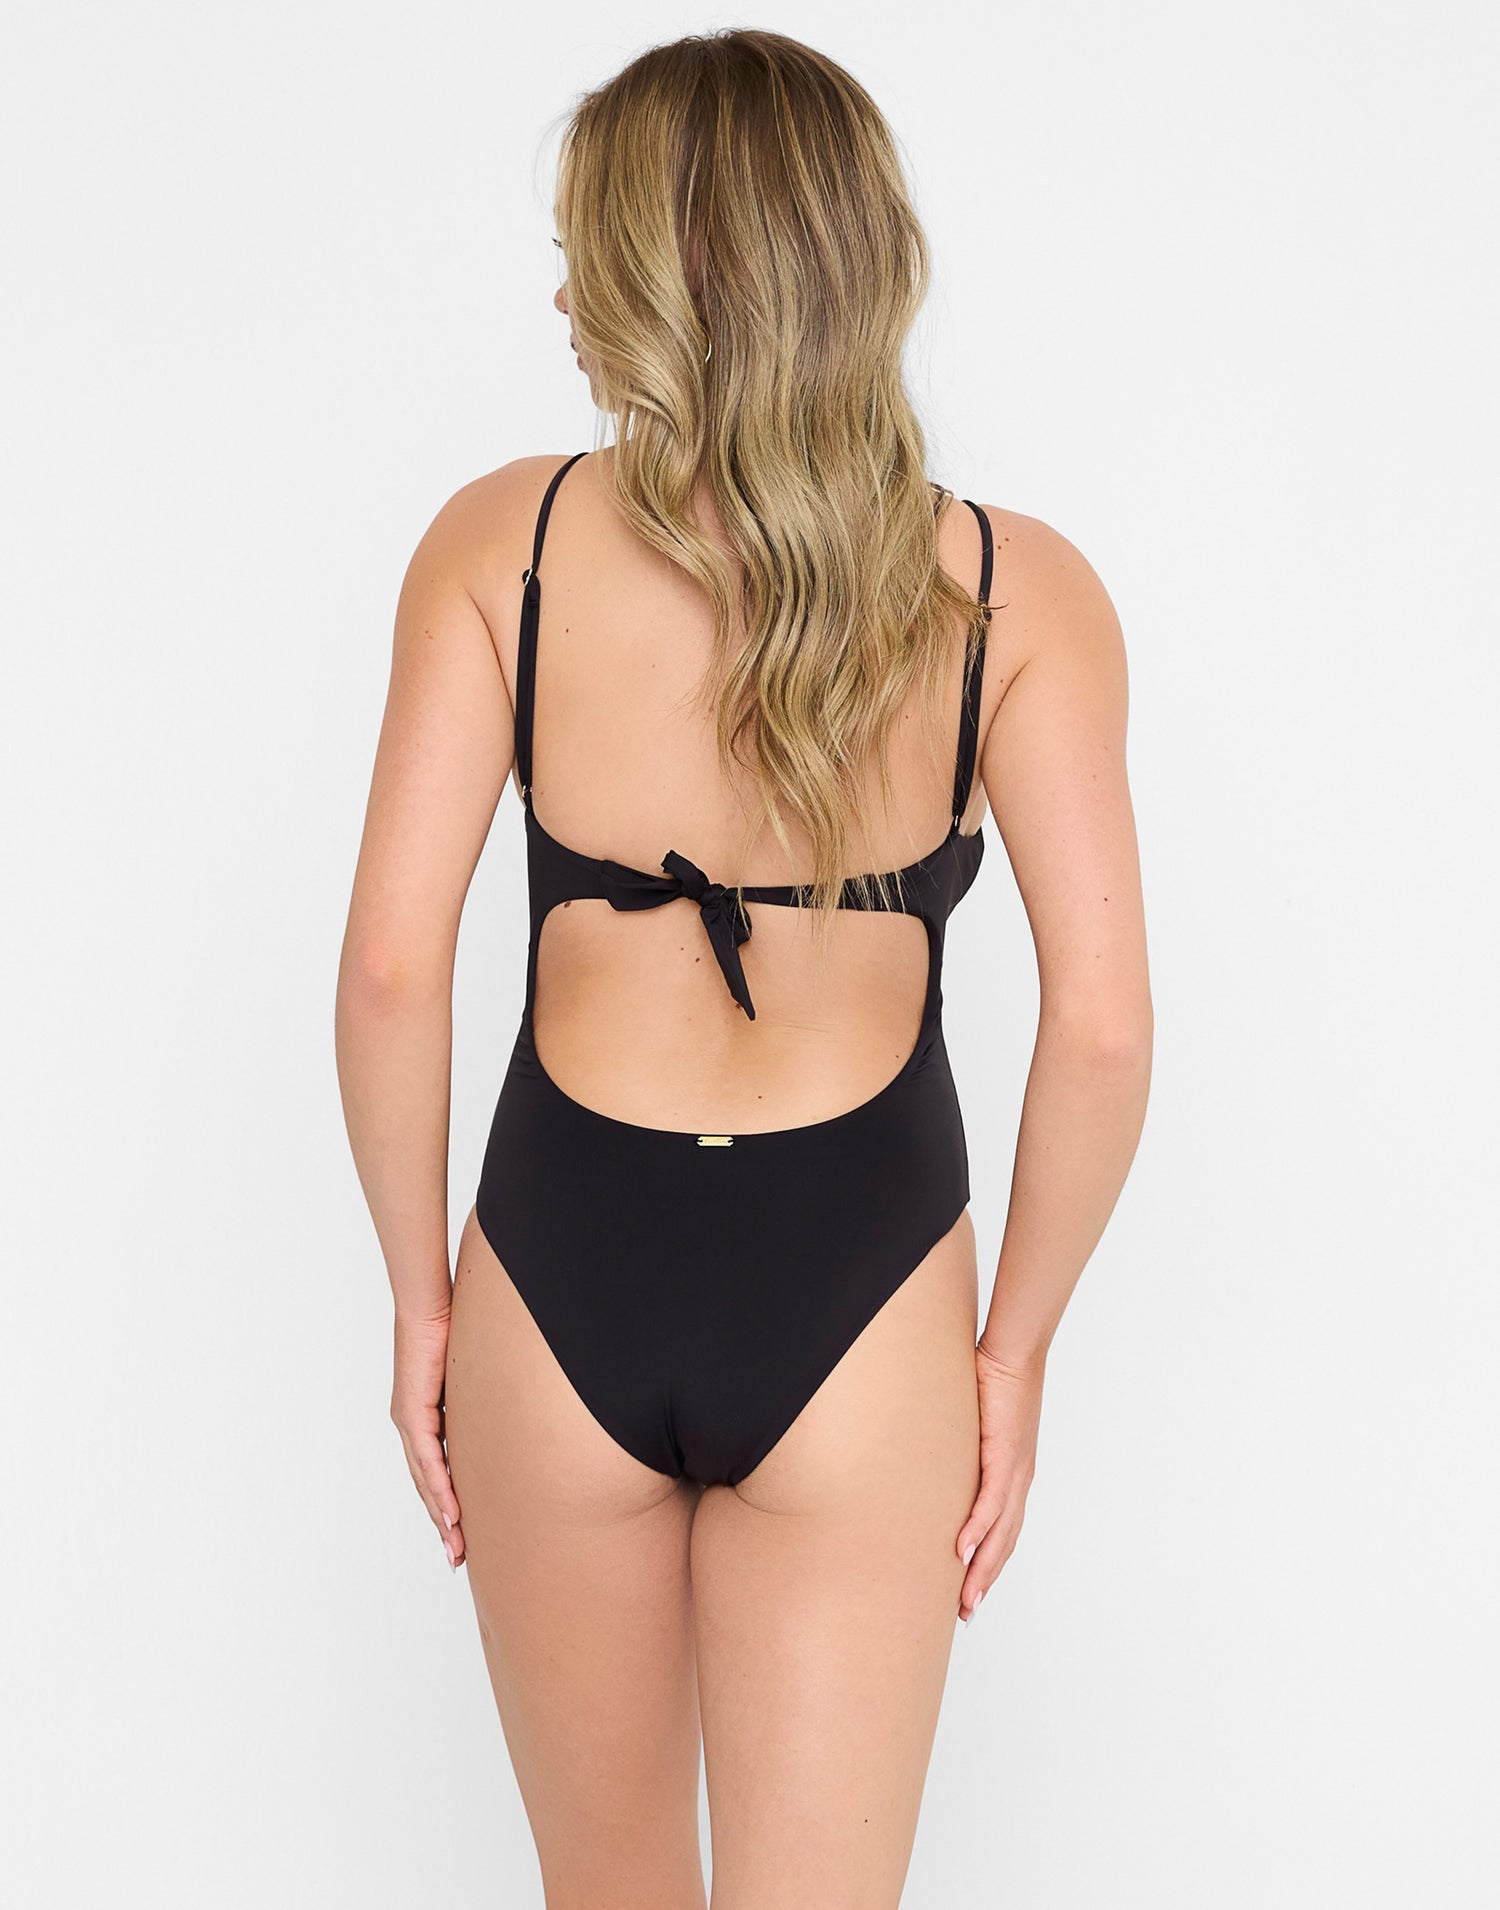 Katrina Full Coverage One Piece Swimsuit in Black with Gold Hammered Ring Hardware - Alternate Back View